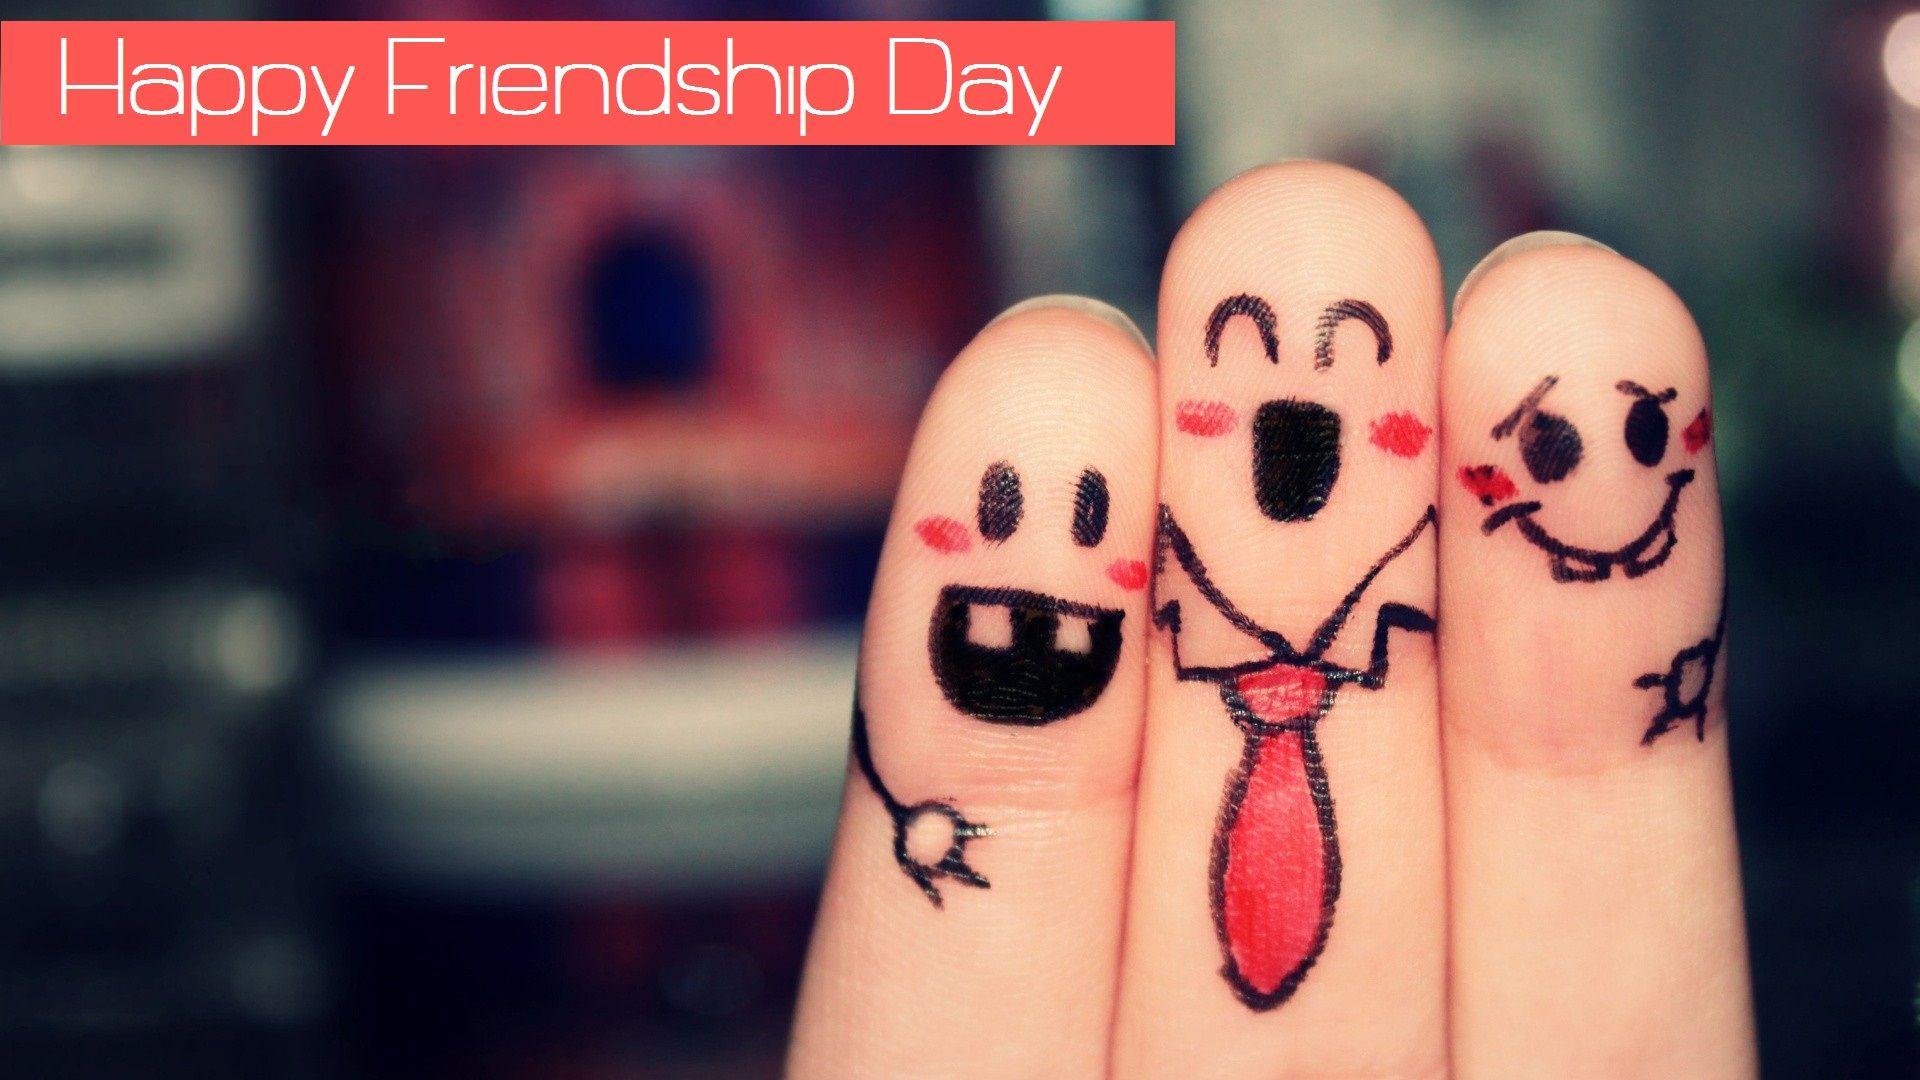 Happy Friendship Day Image Wallpaper and Greetings